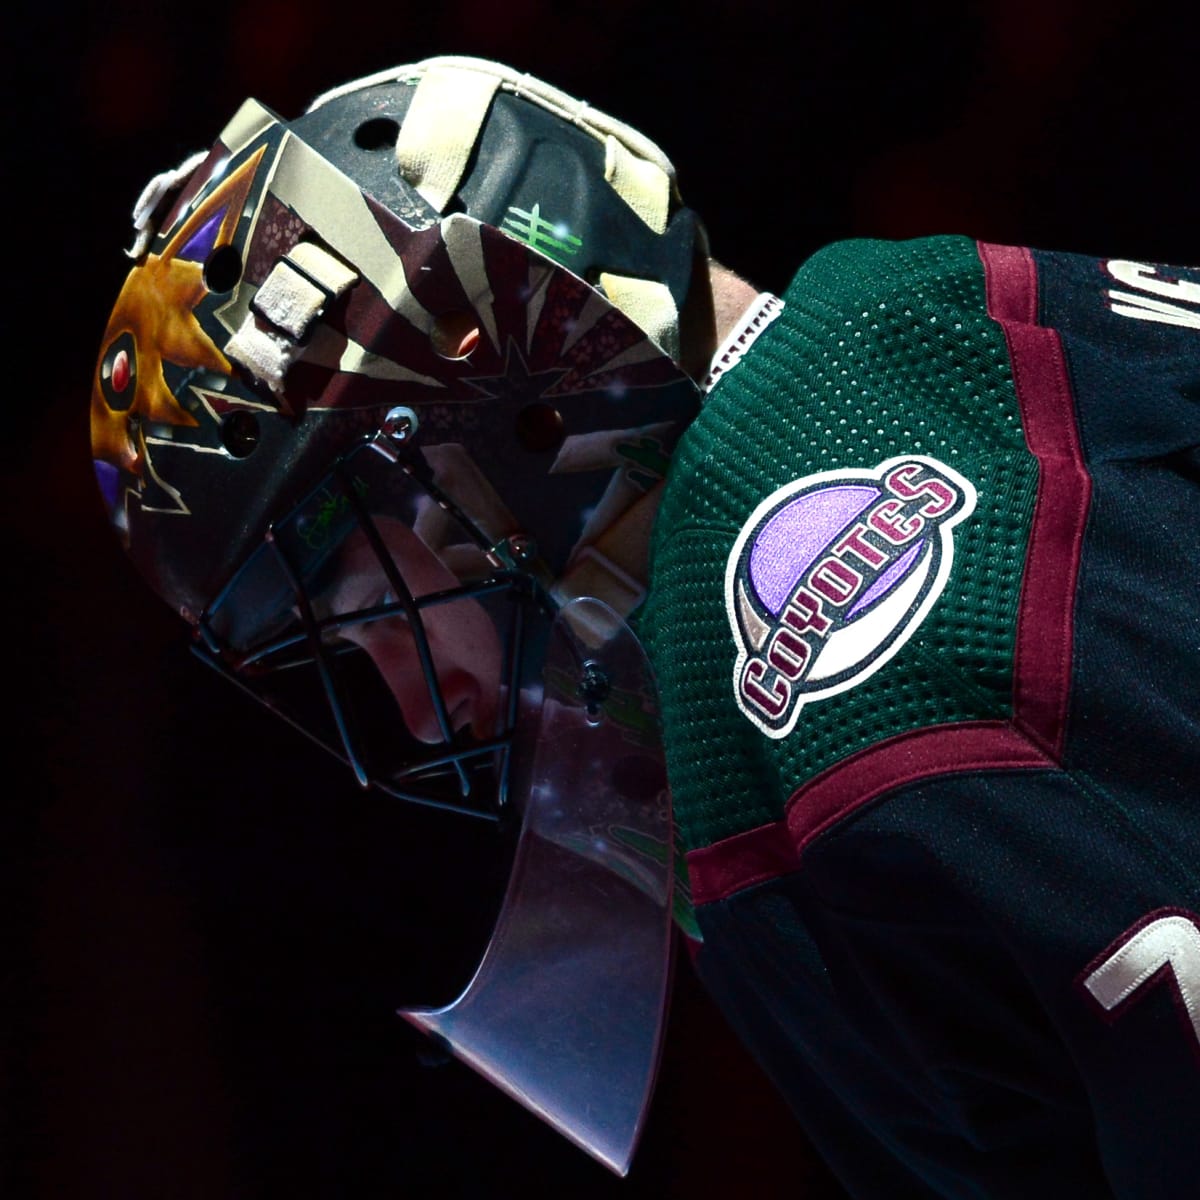 Gila River Arena: NHL's Arizona Coyotes could be locked out of